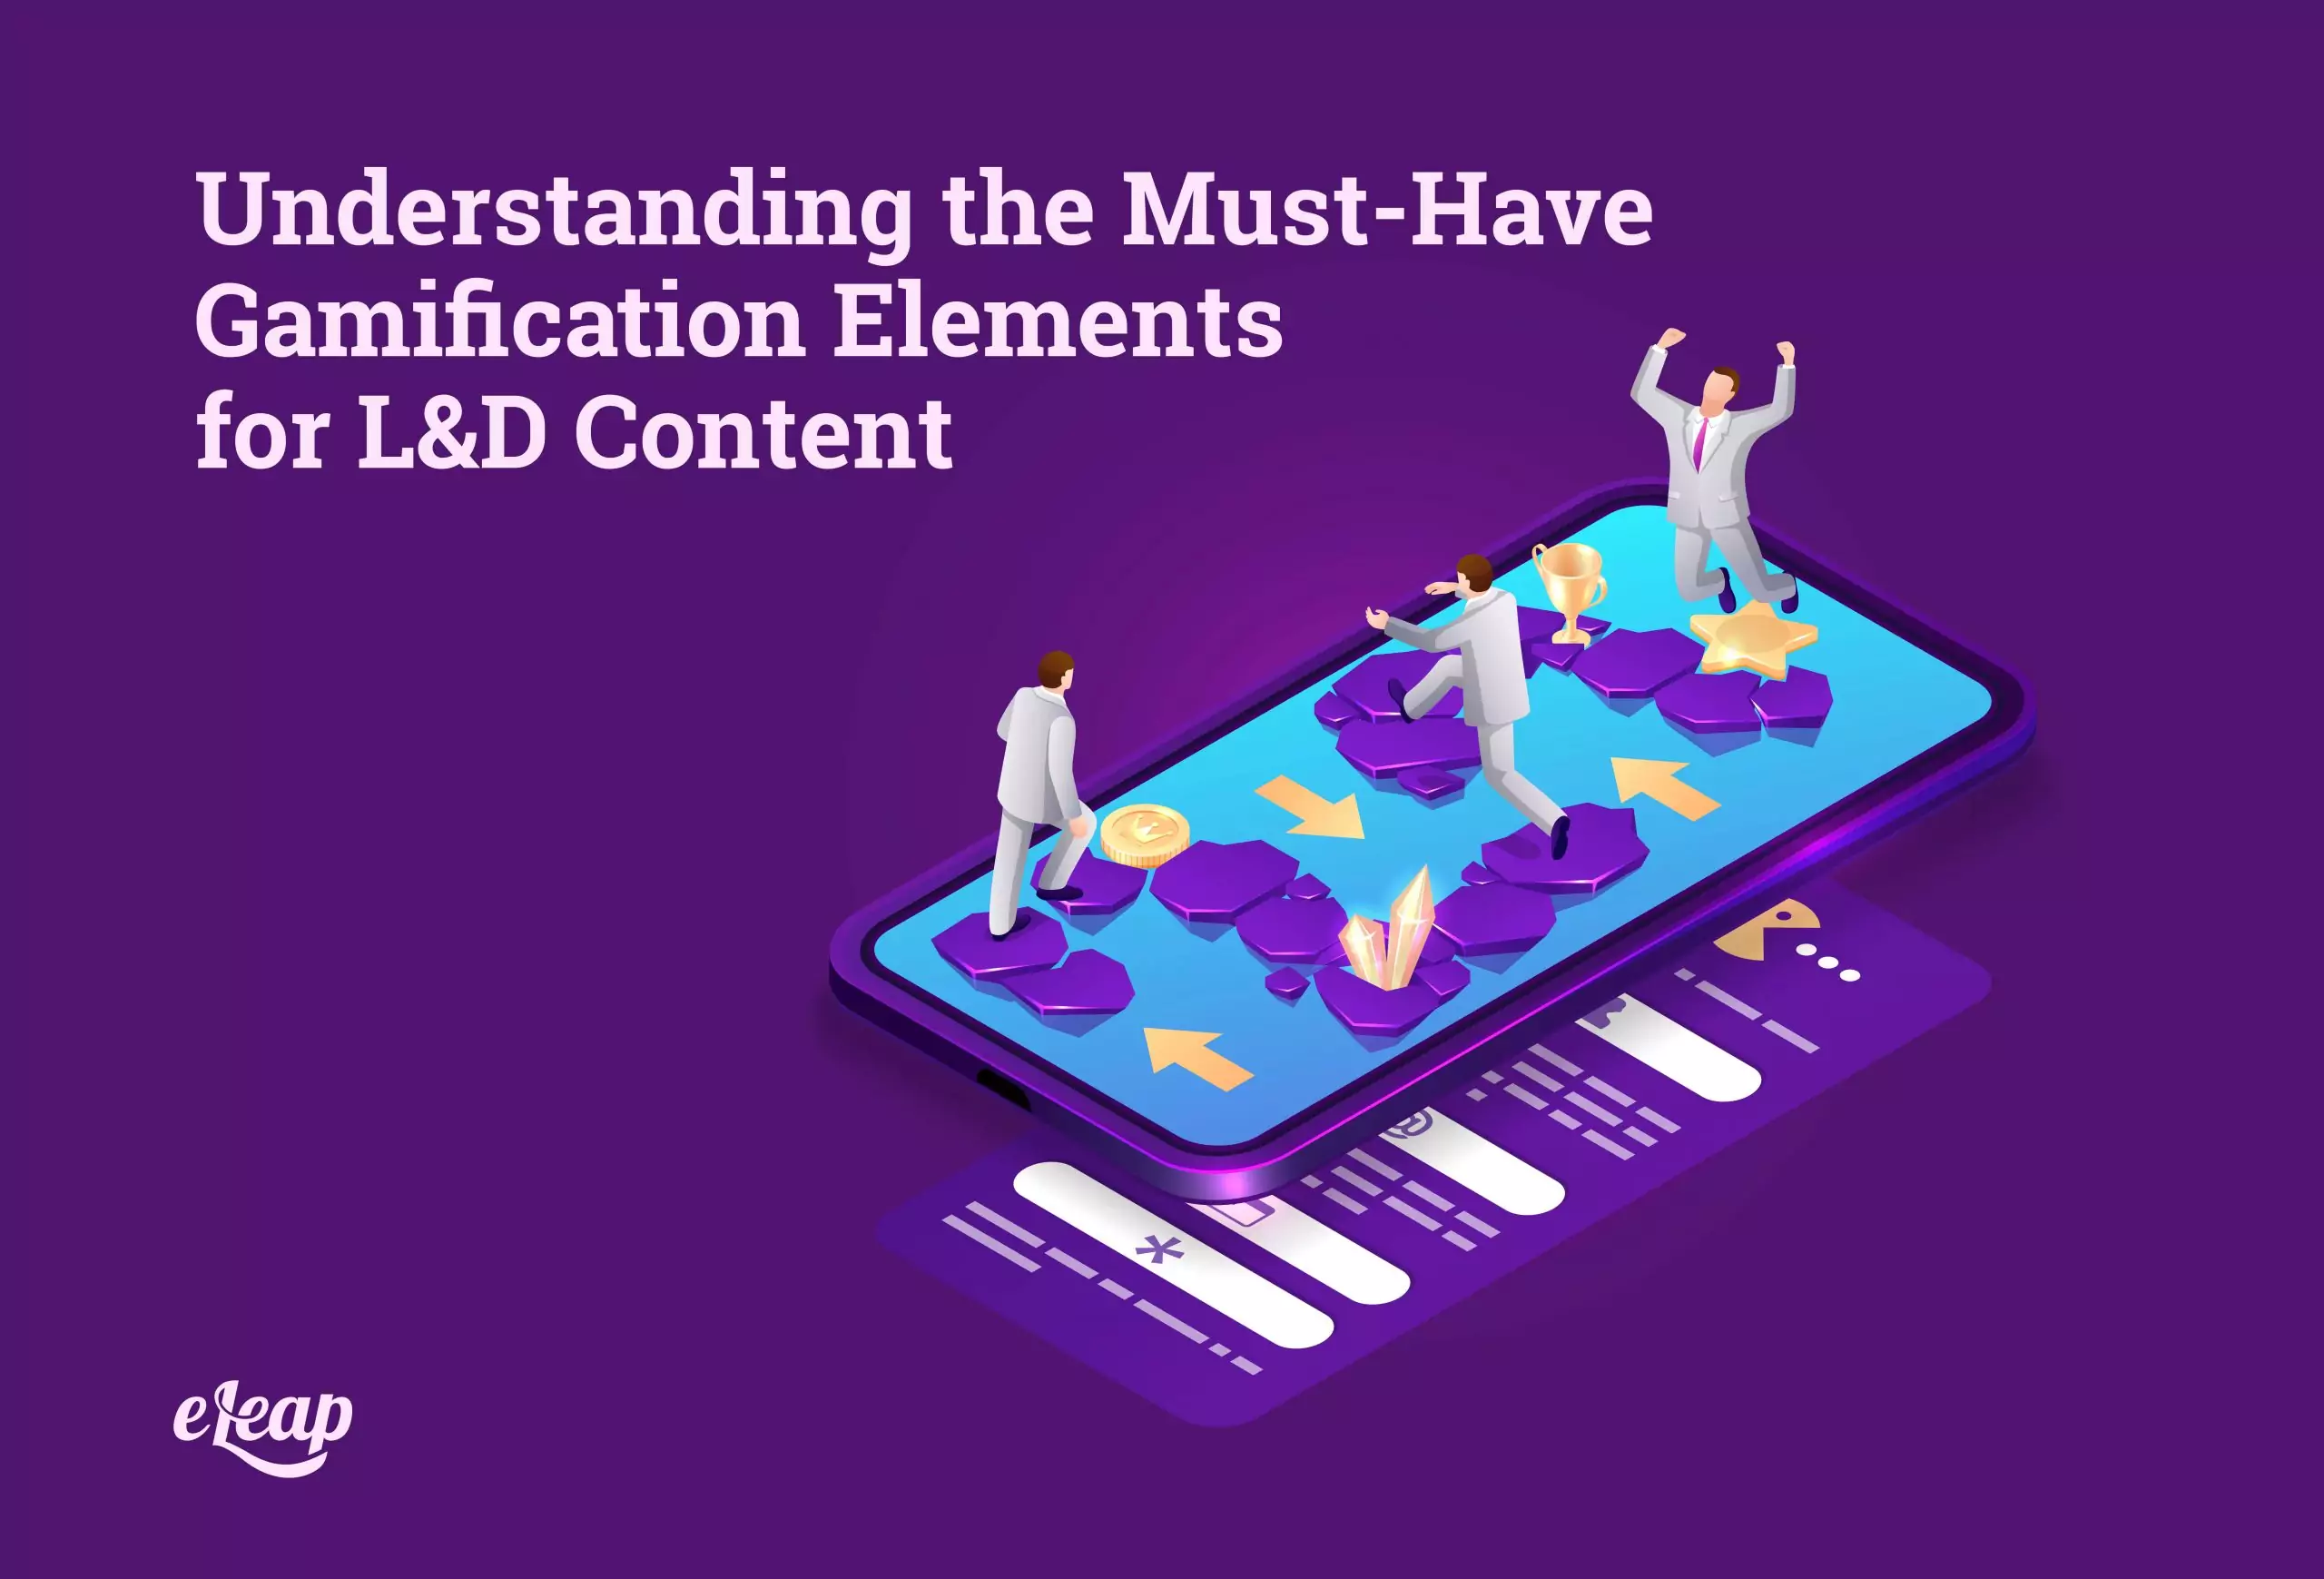 Understanding the Must-Have Gamification Elements for L&D Content